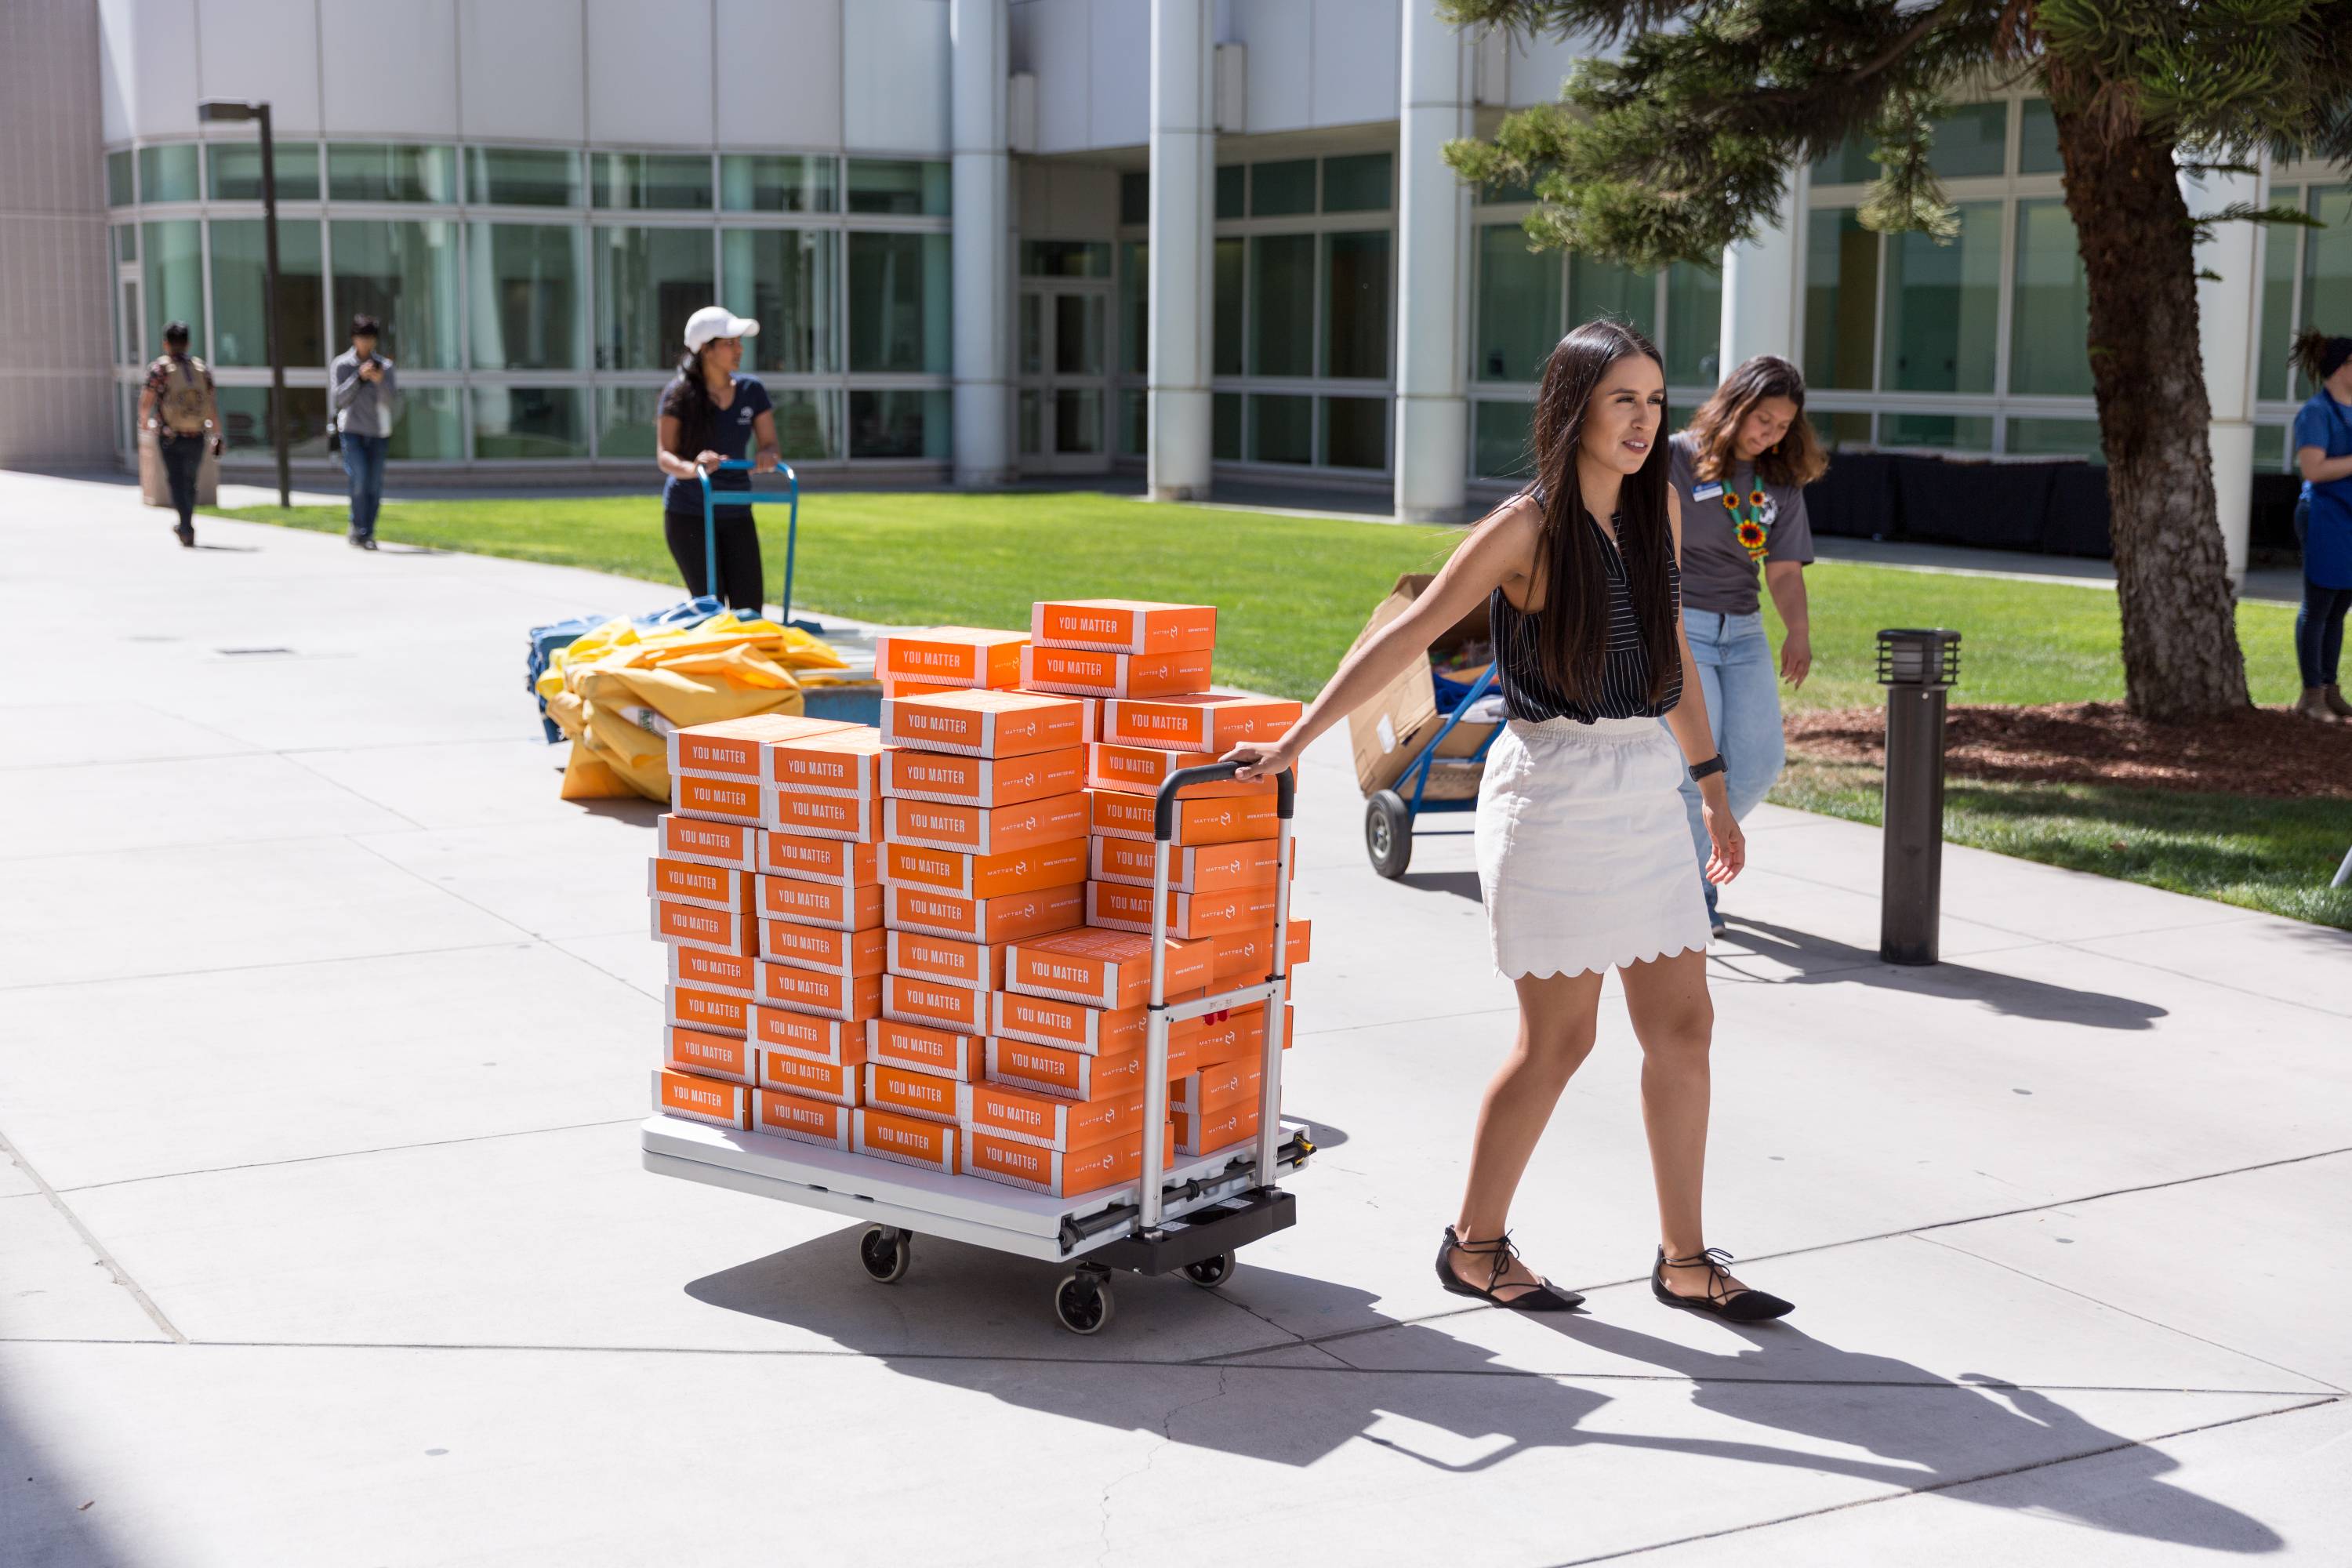 Female students pull dollies outside filled with boxes of food.